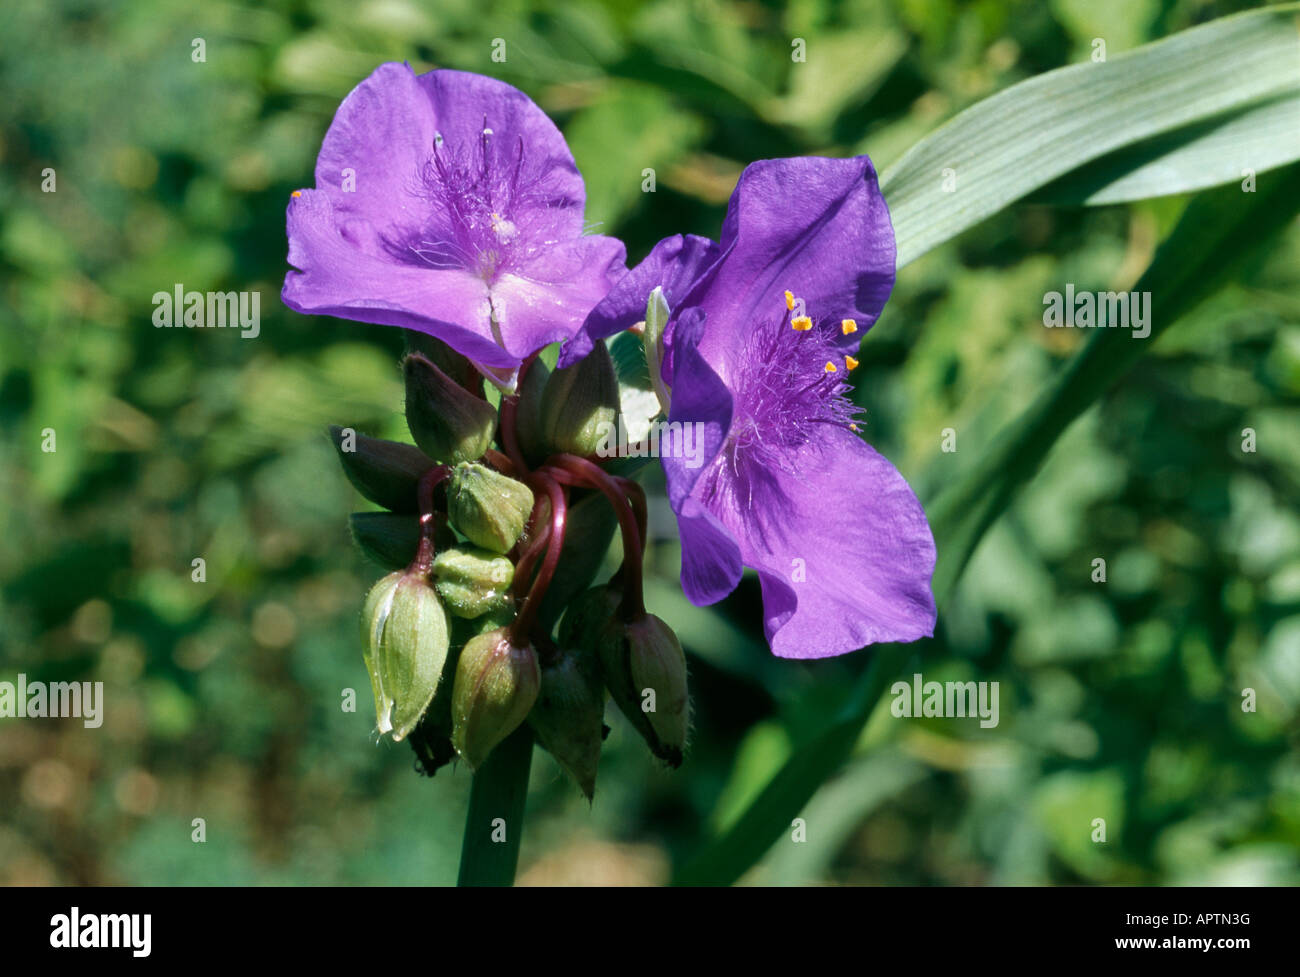 Tradescantia andersoniana purple cluster of small dainty flowers Stock Photo